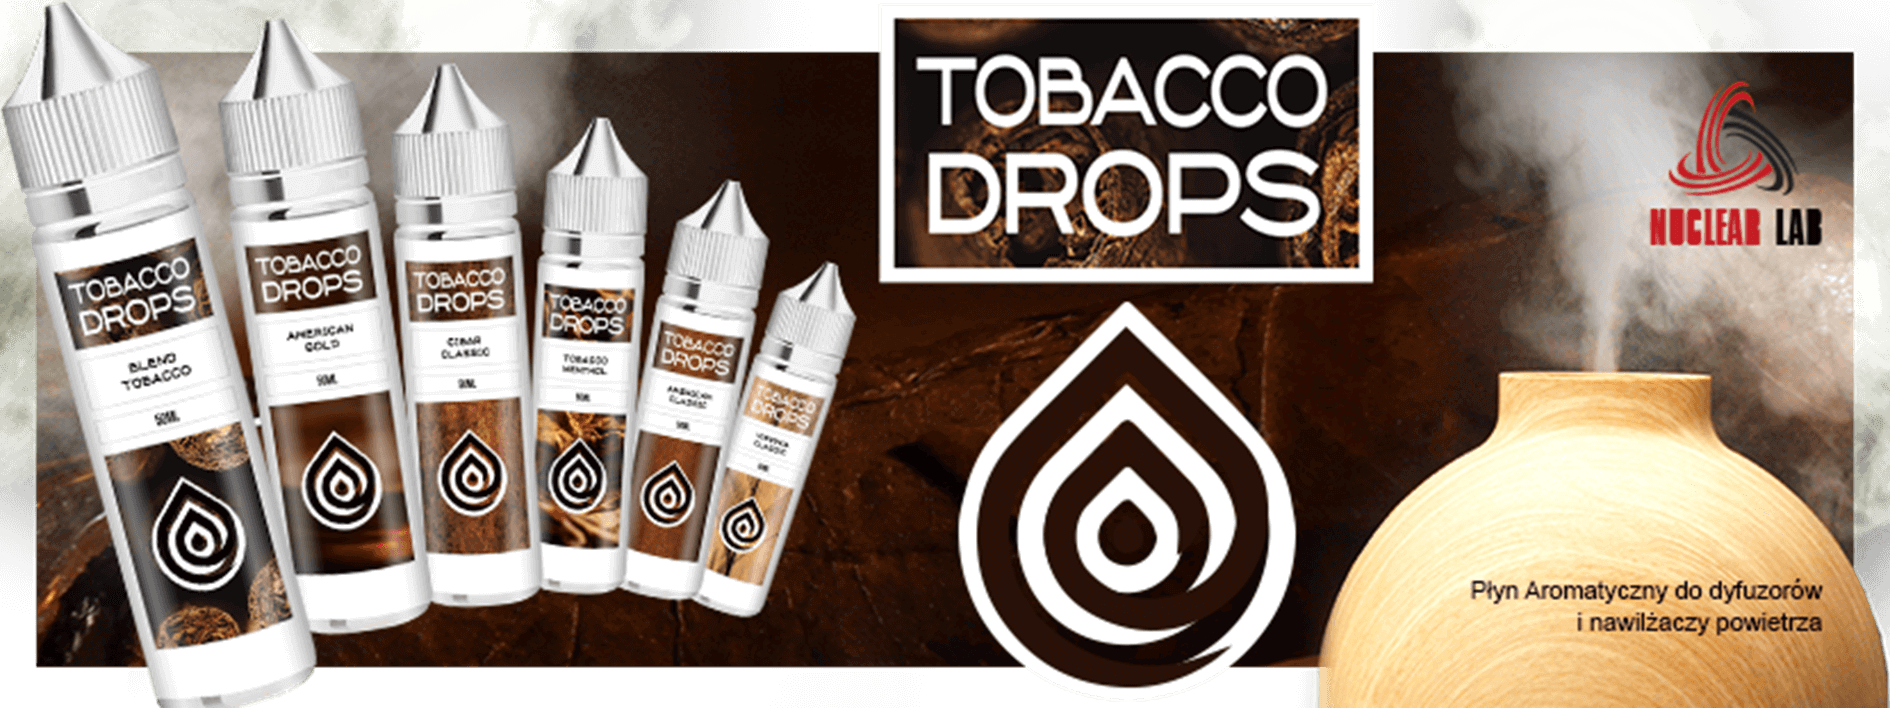 tobacco-drops-large